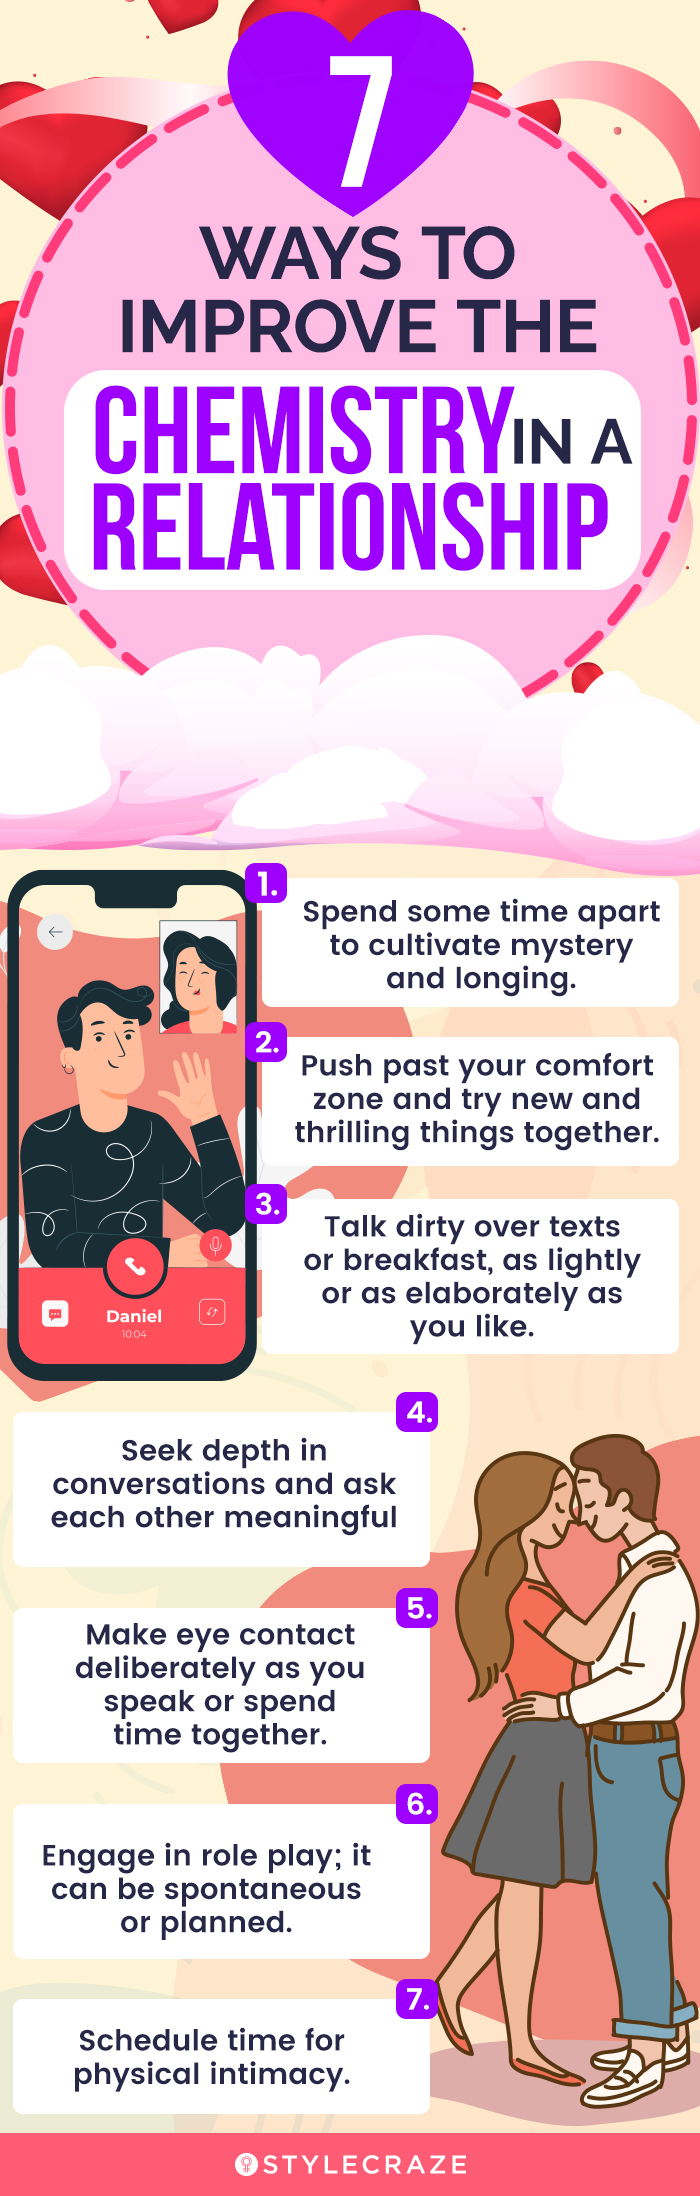 7 ways to improve the chemistry in a relationship [infographic]